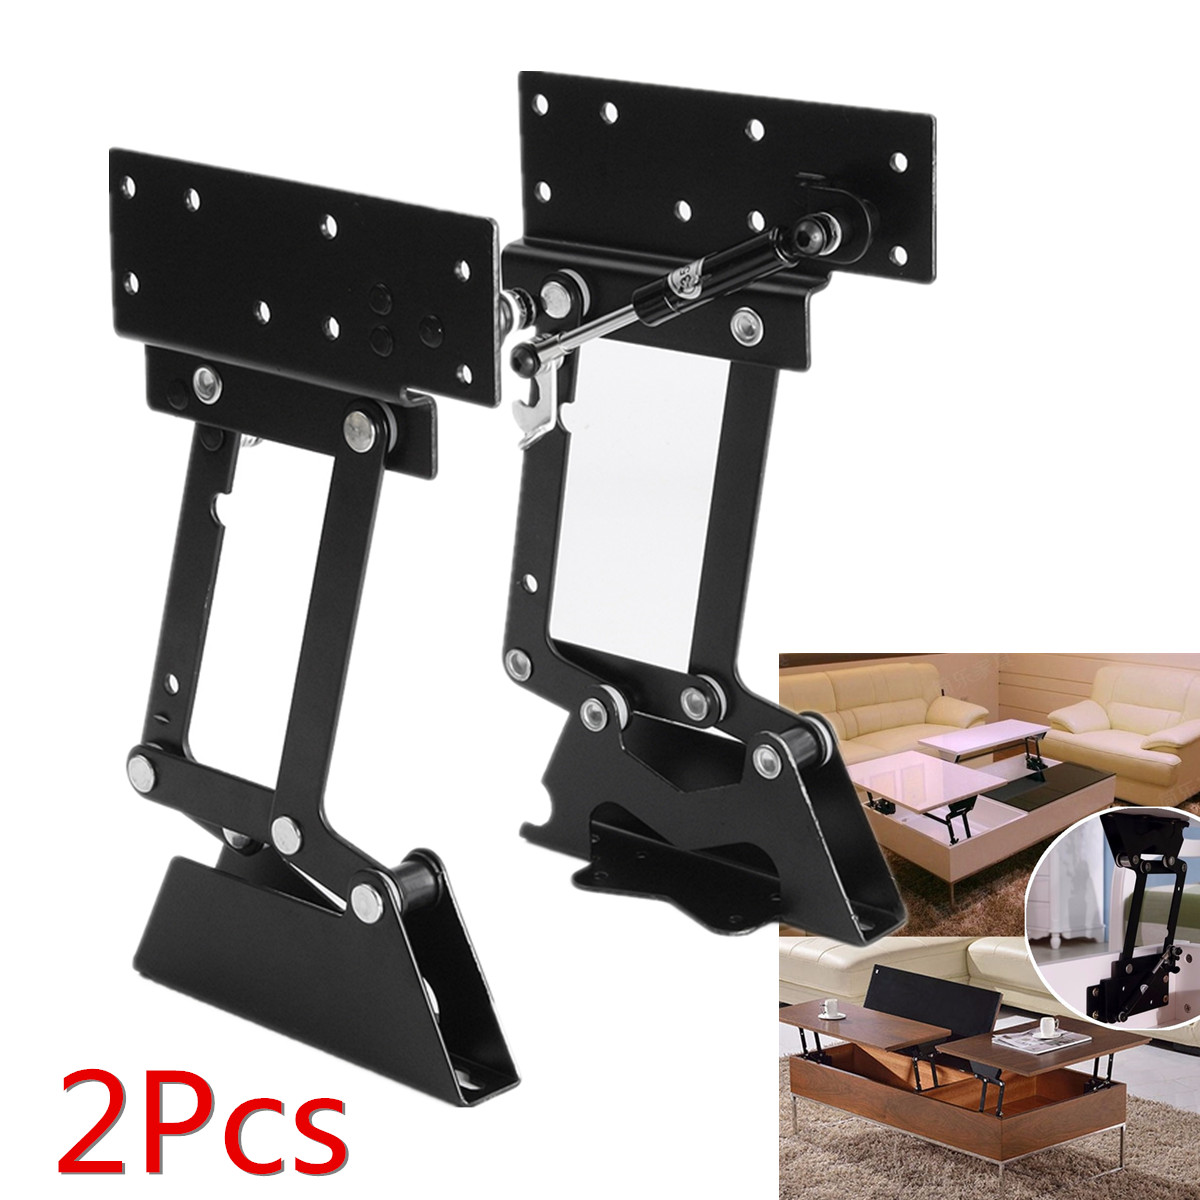 2pcs Lift Up Coffee Table DIY Hardware Fitting Suppor Frame Furniture Hinge